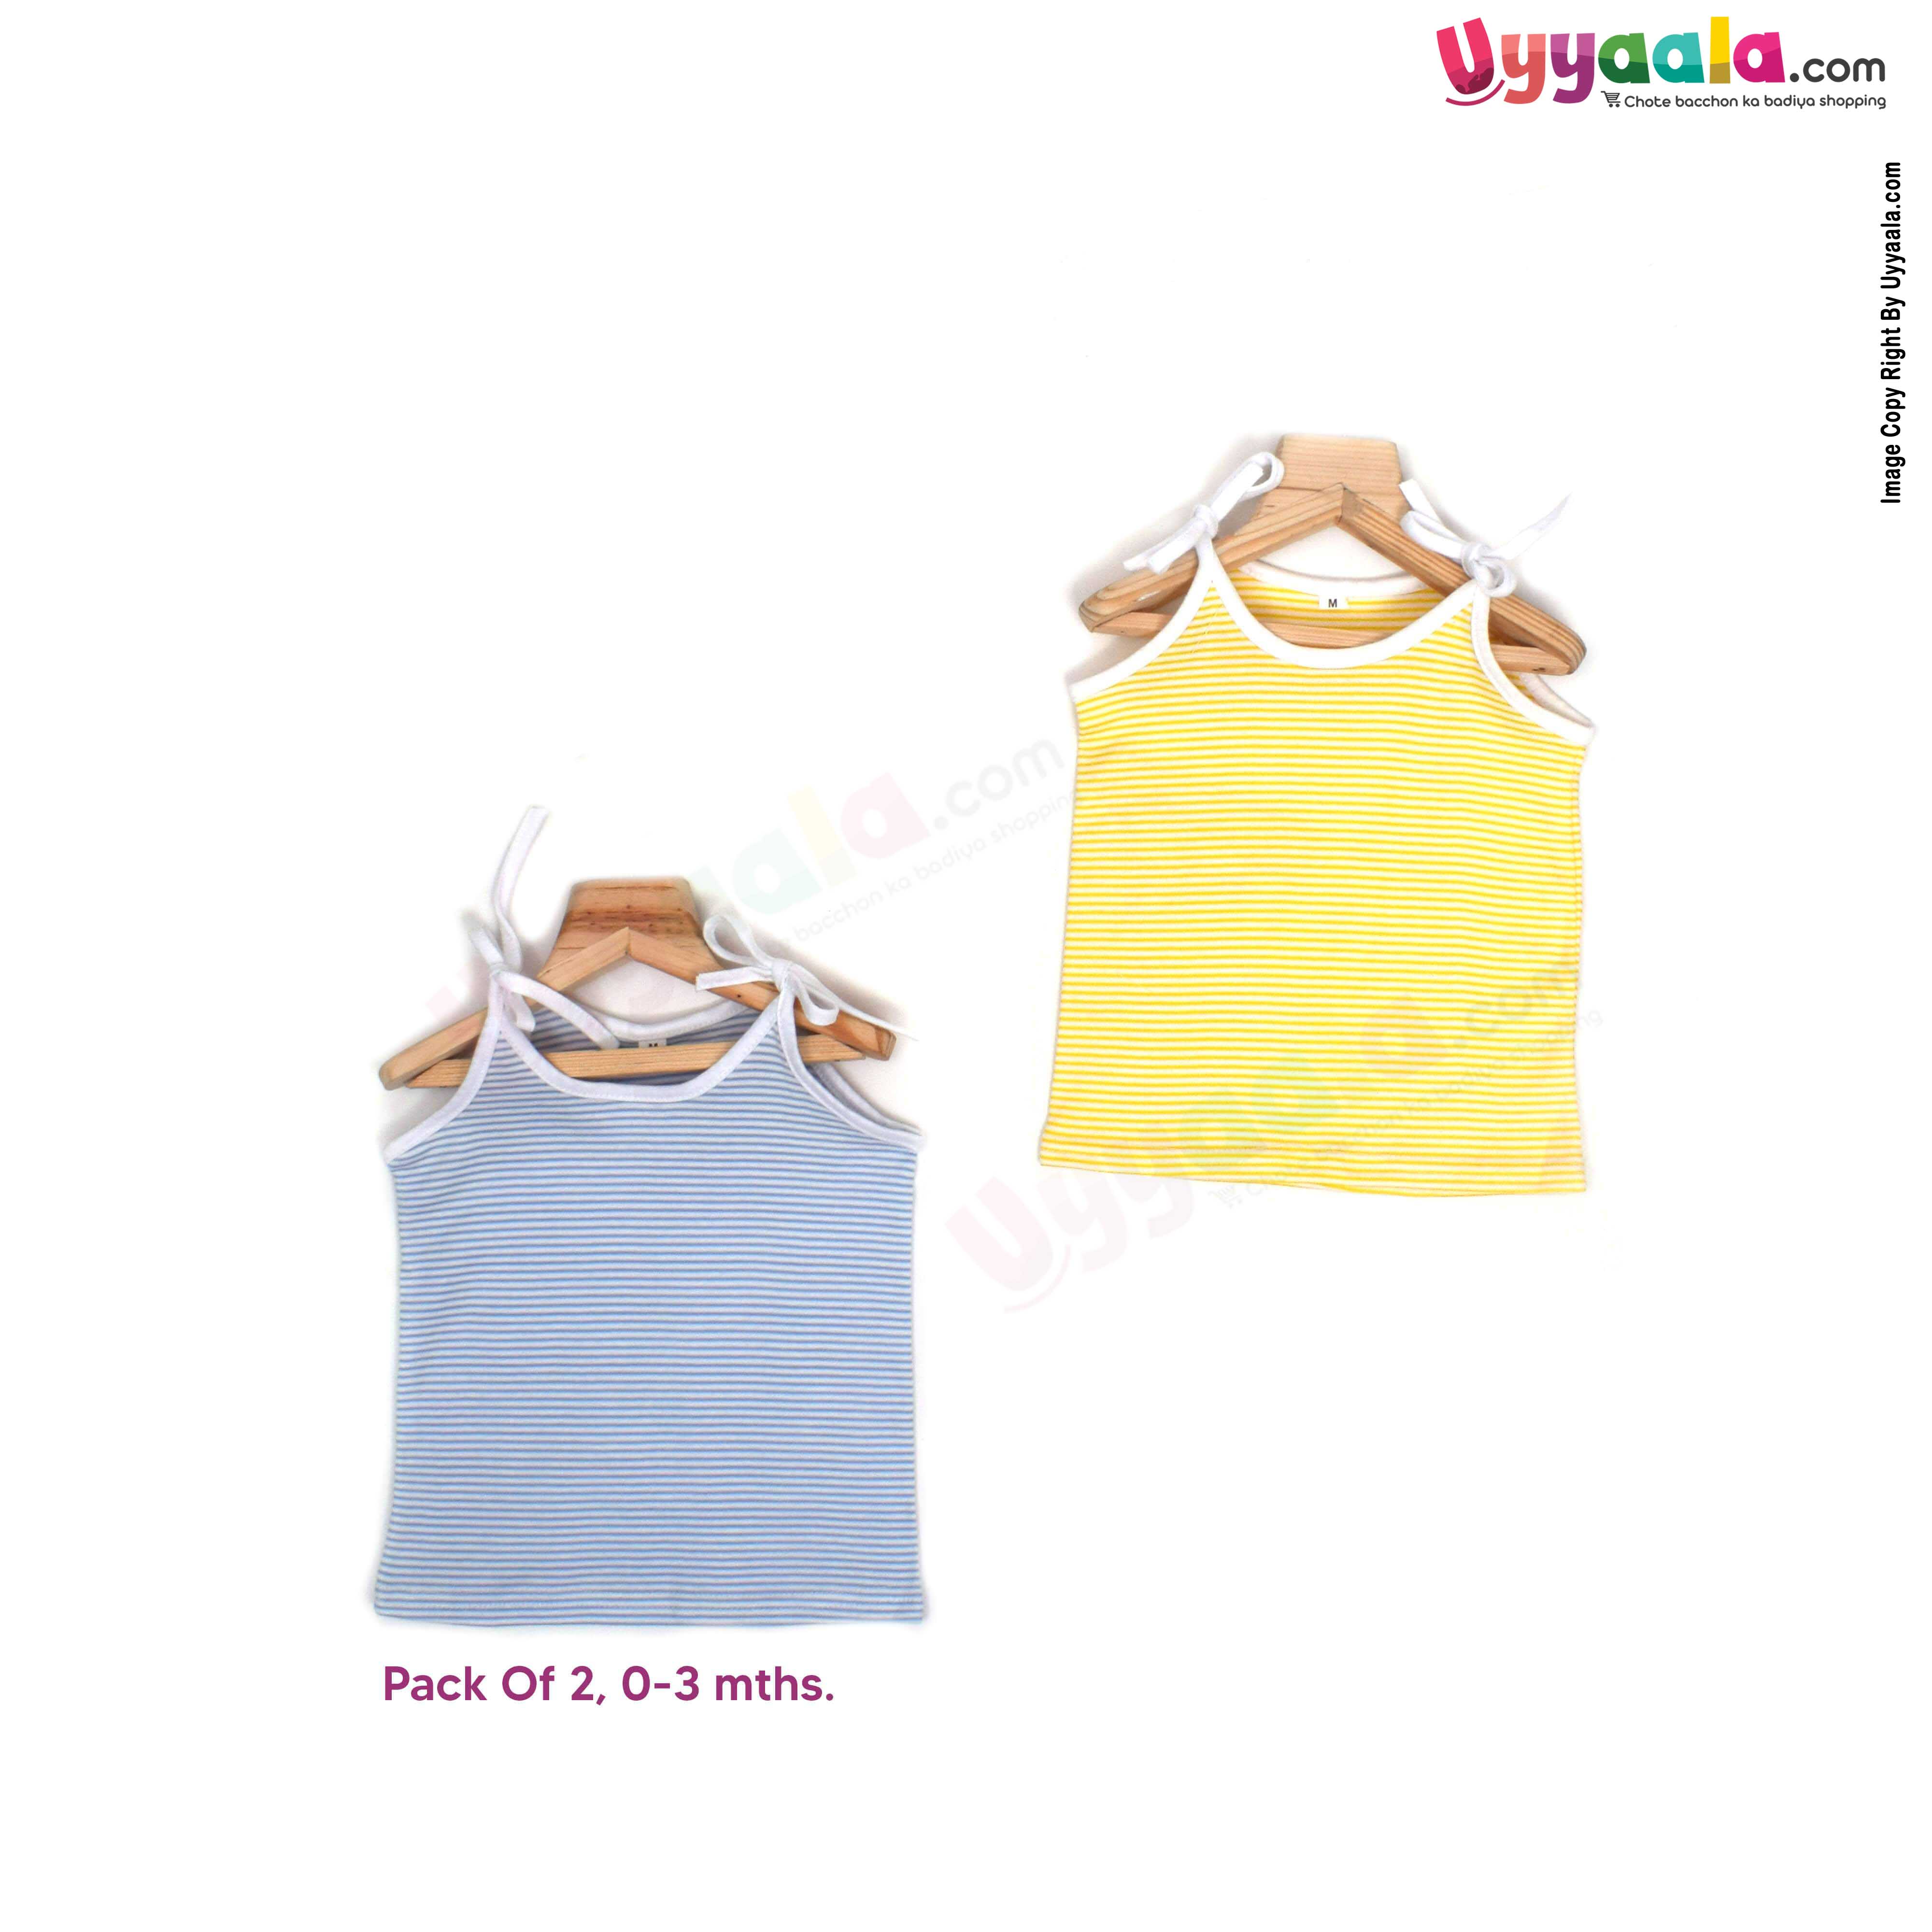 SNUG UP Sleeveless Baby Jabla Set, Top Opening Tie knot Lace Model, Premium Quality Cotton Baby Wear, Stripes Print, (0-3M), 2Pack - Blue & Yellow